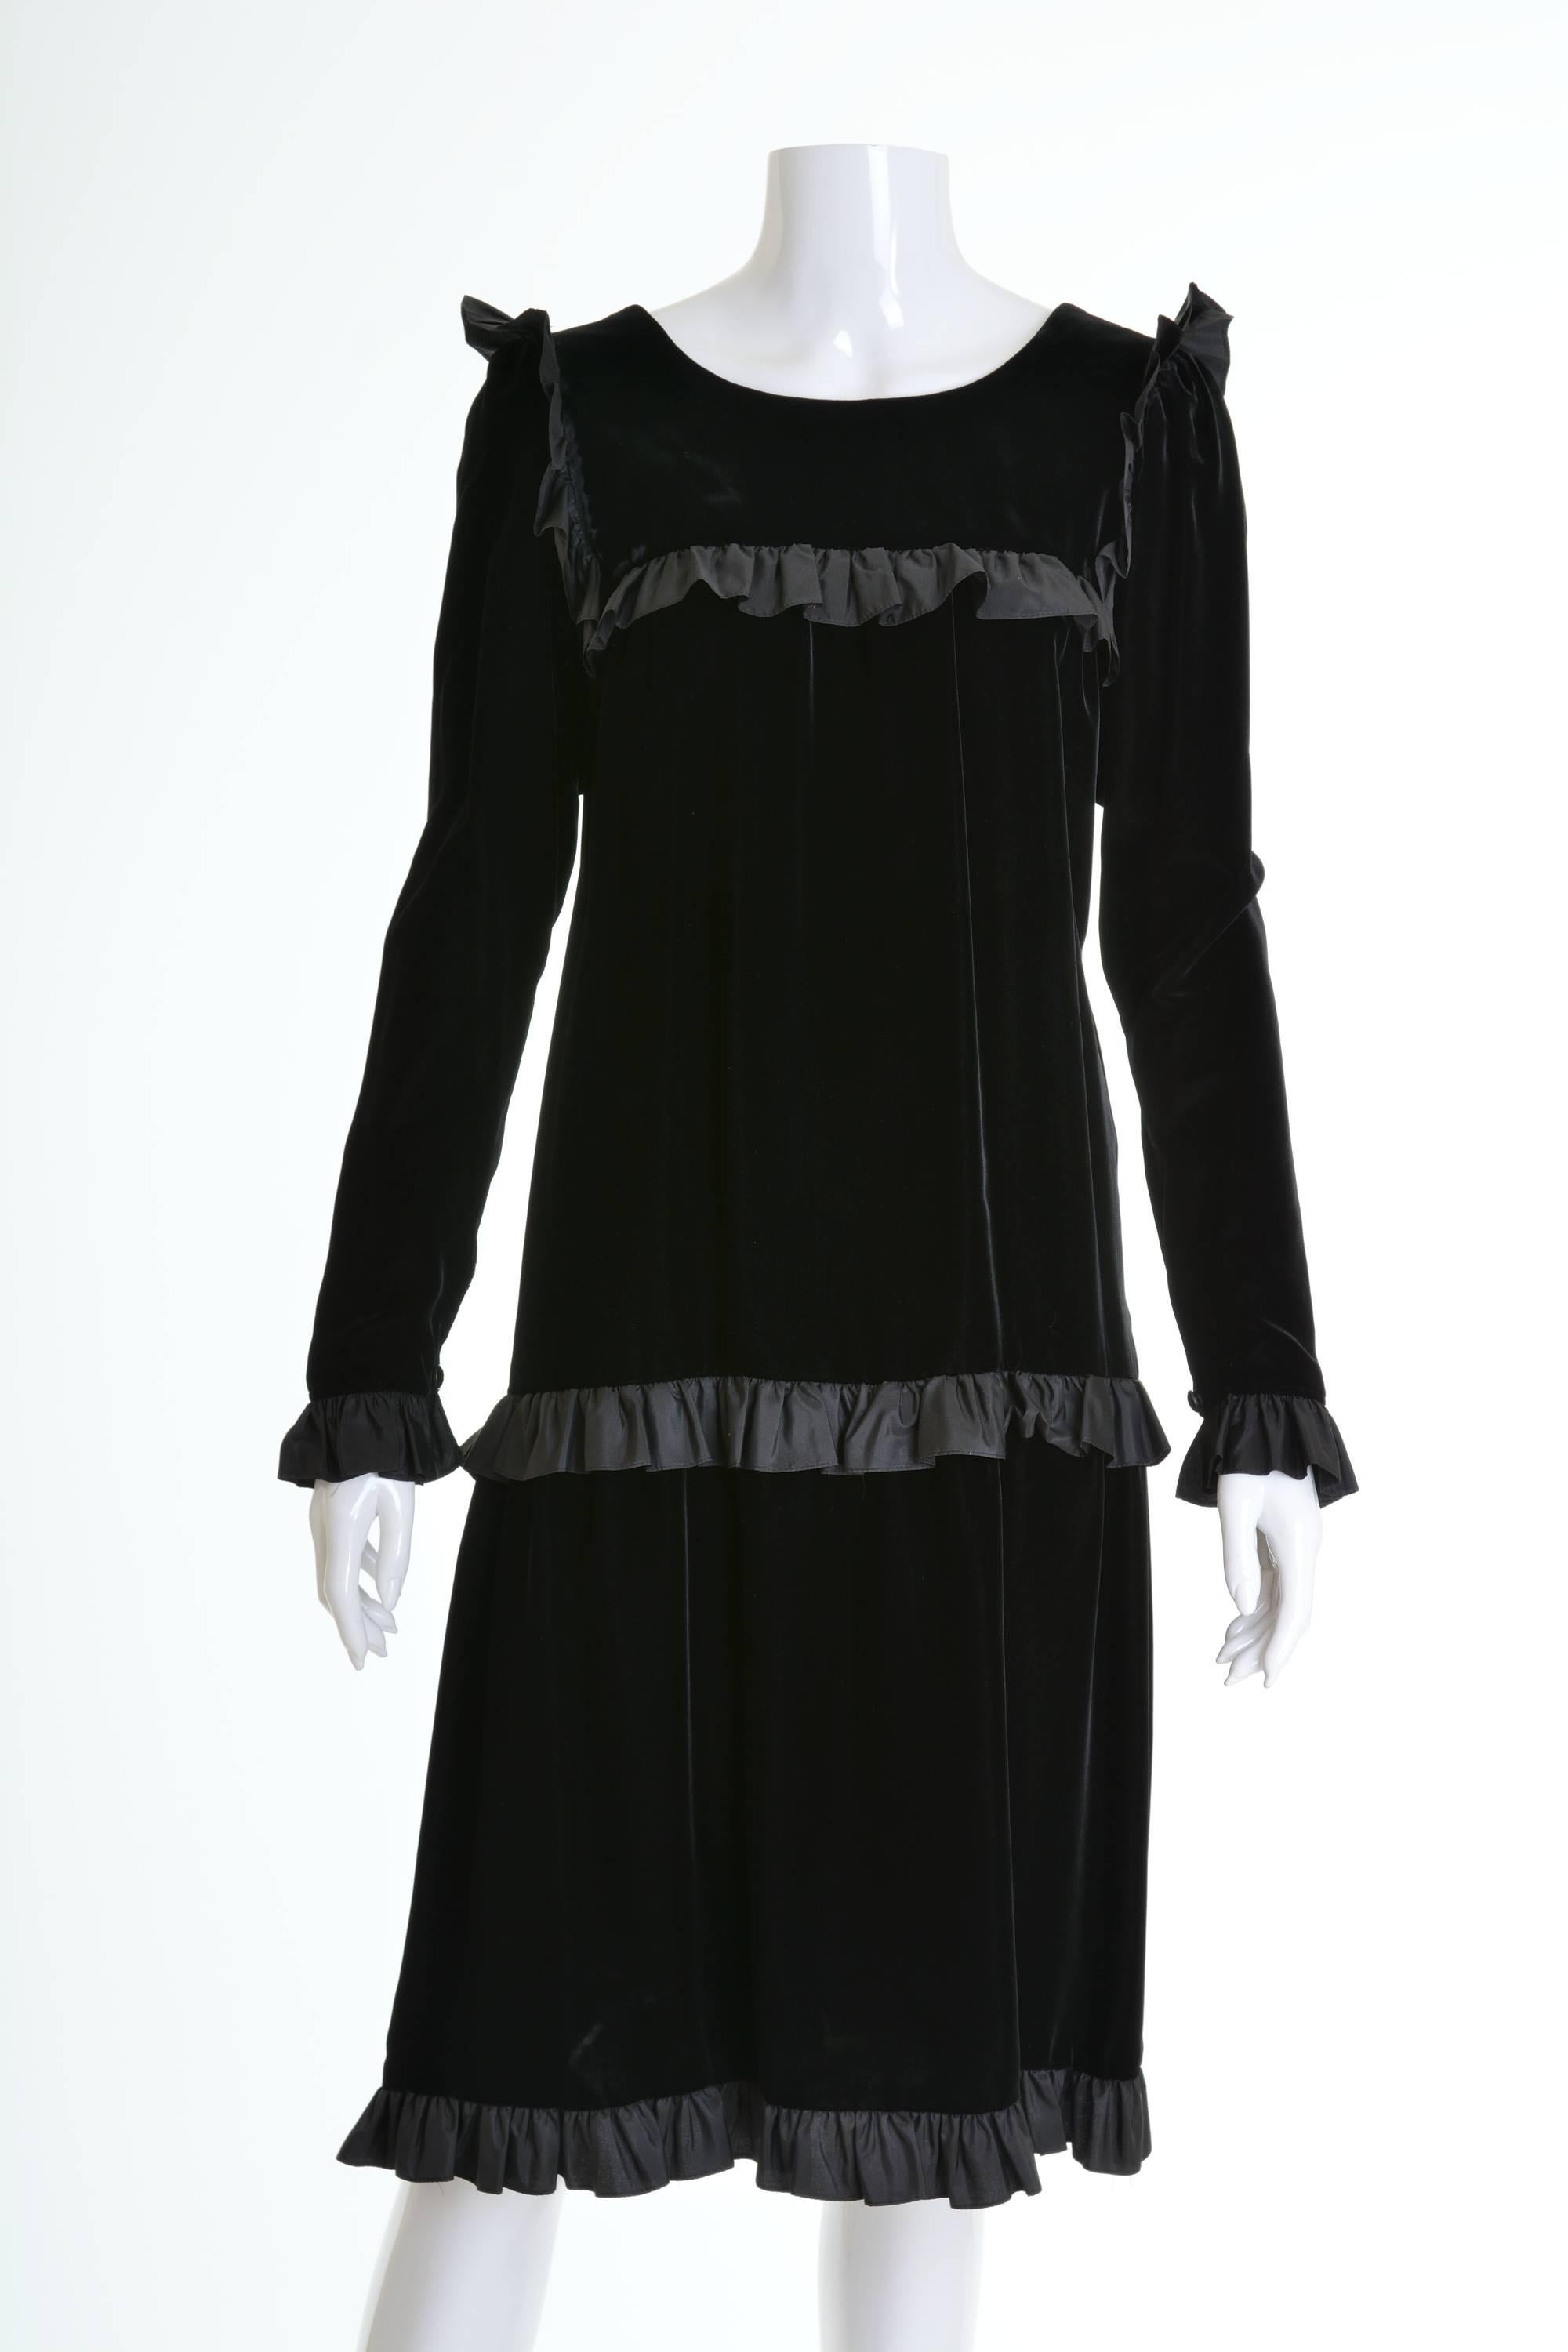 This lovely Yves Saint Laurent Rive Gauche dress is in a black silk velvet fabric. It has ruffled details, back buttons closure and side pockets.

Very good vintage condition

Label : Saint Laurent Rive Gauche
Fabric : silk
color :